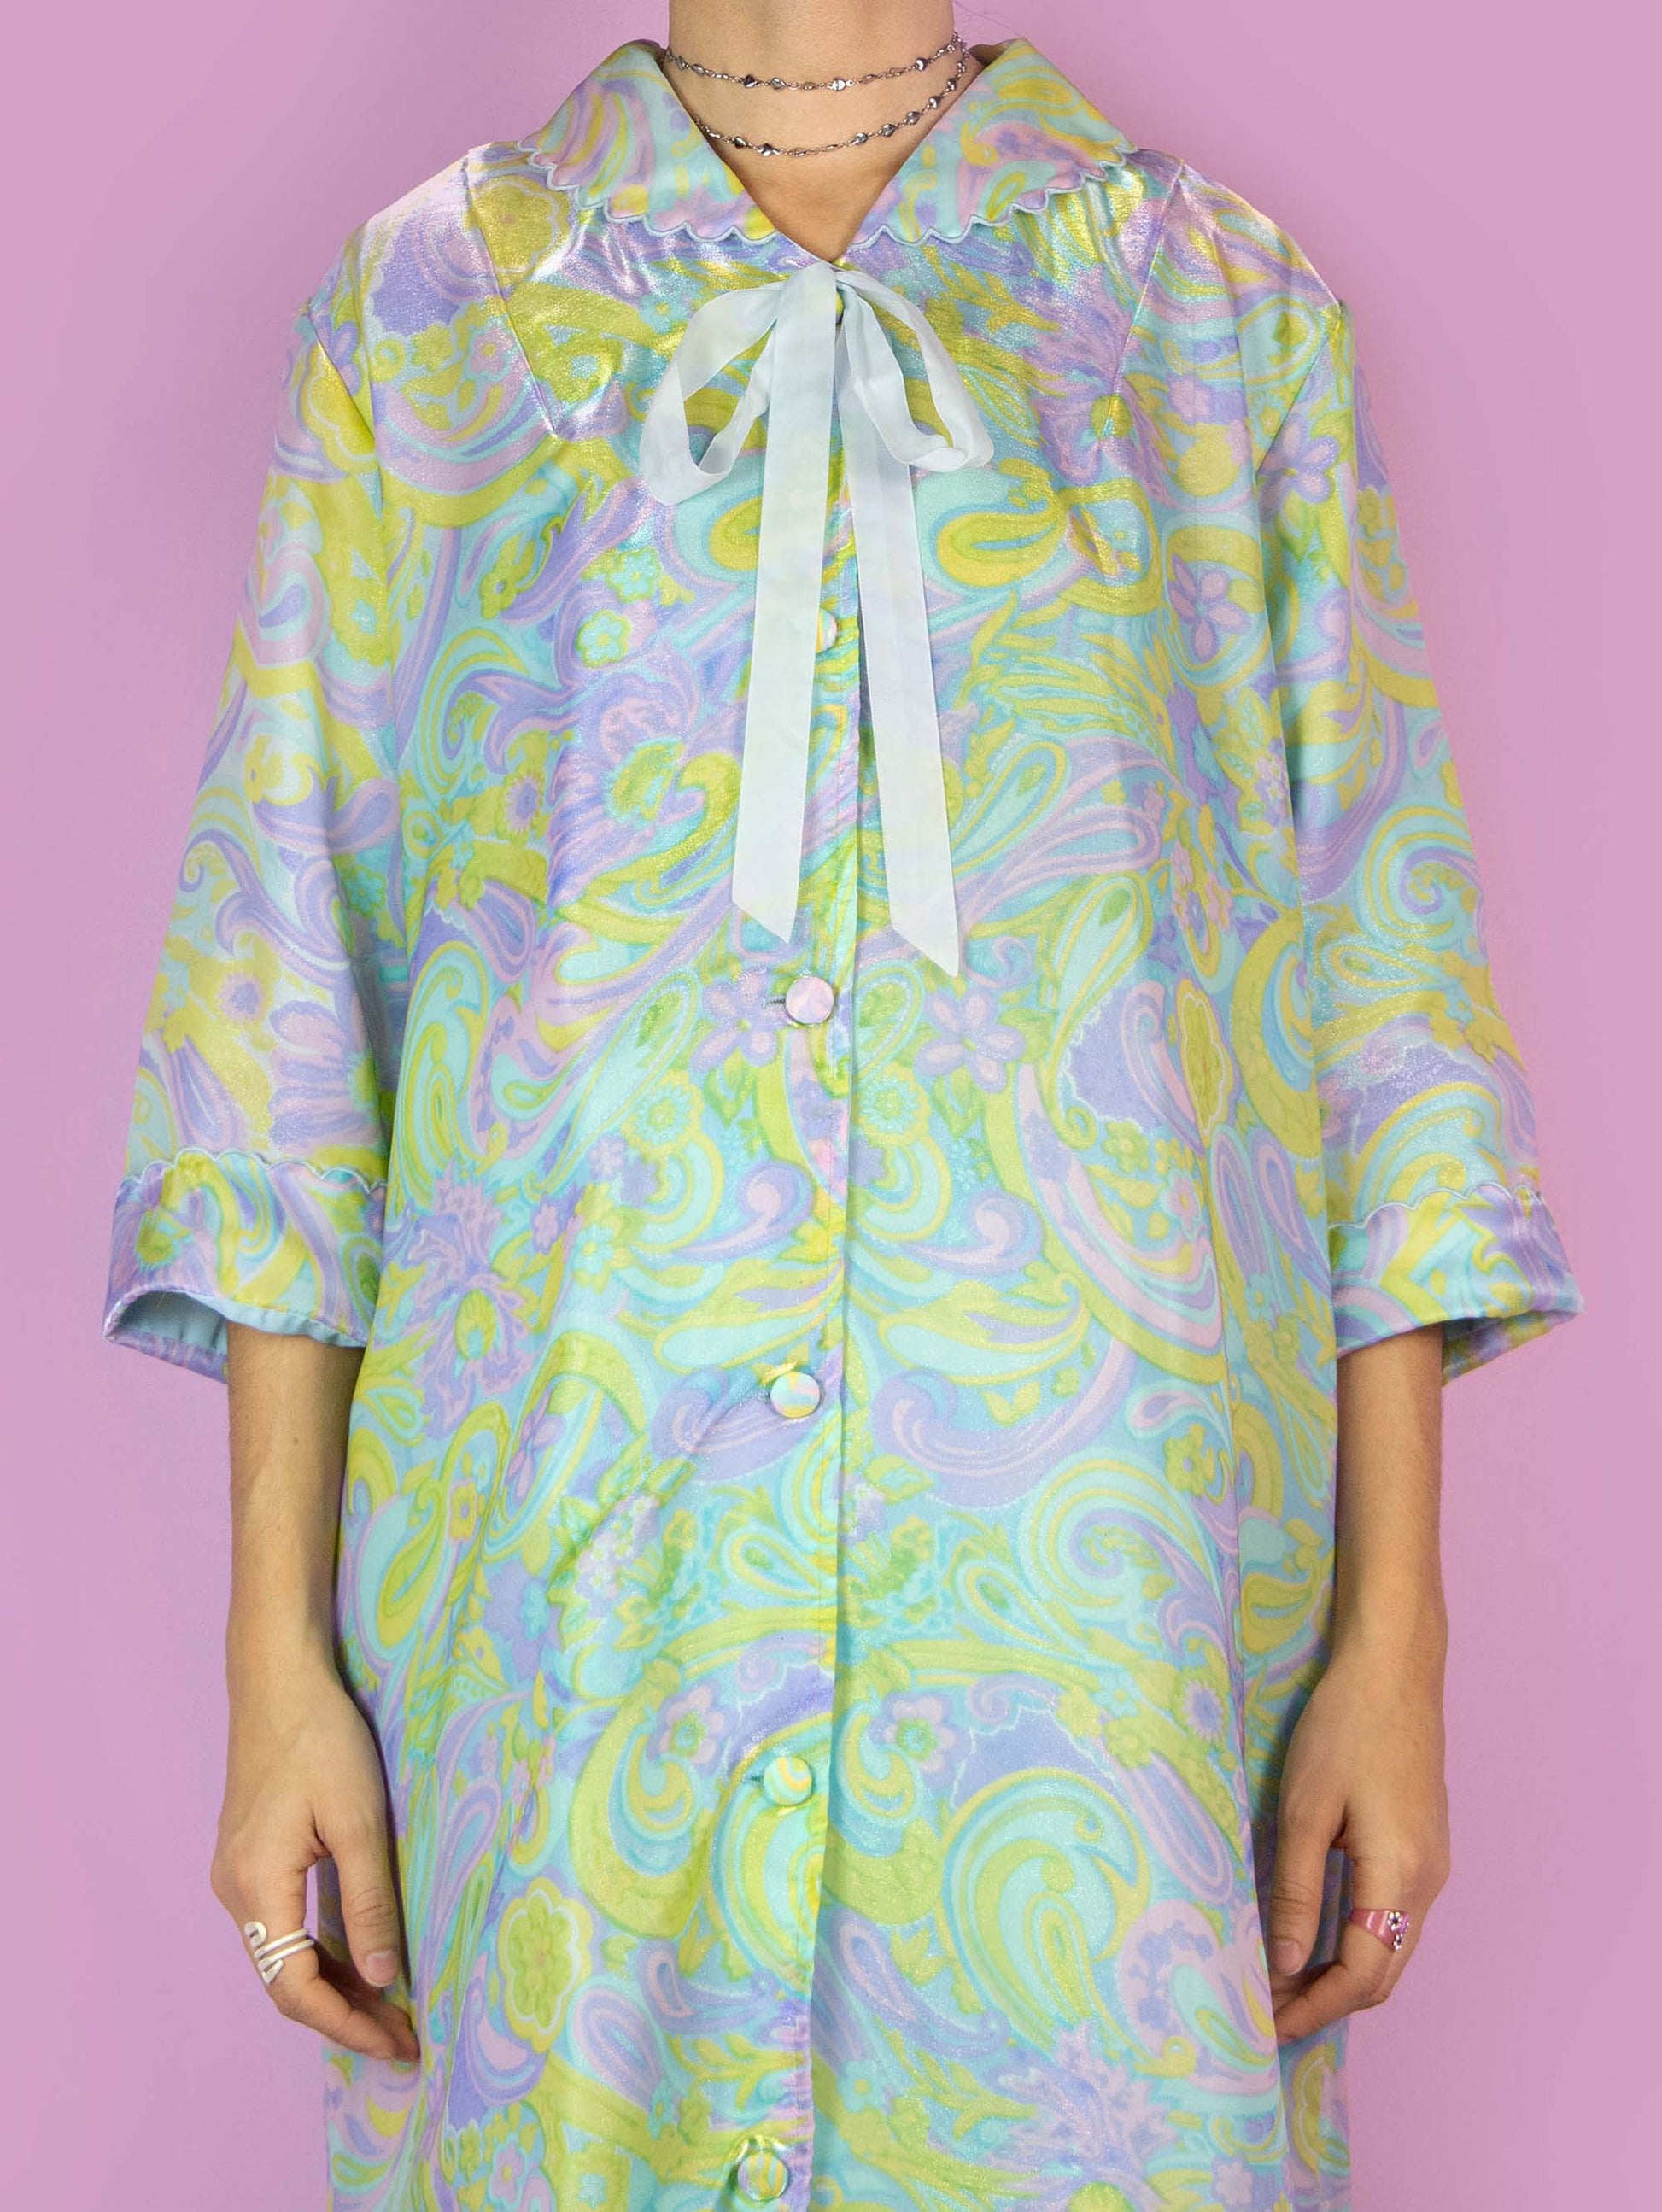 The Vintage 70s Pastel Duster Robe is a multicolored pastel robe with an abstract floral paisley print, half sleeves, button closure, and a tie collar. Romantic 1970s boho peignoir jacket.